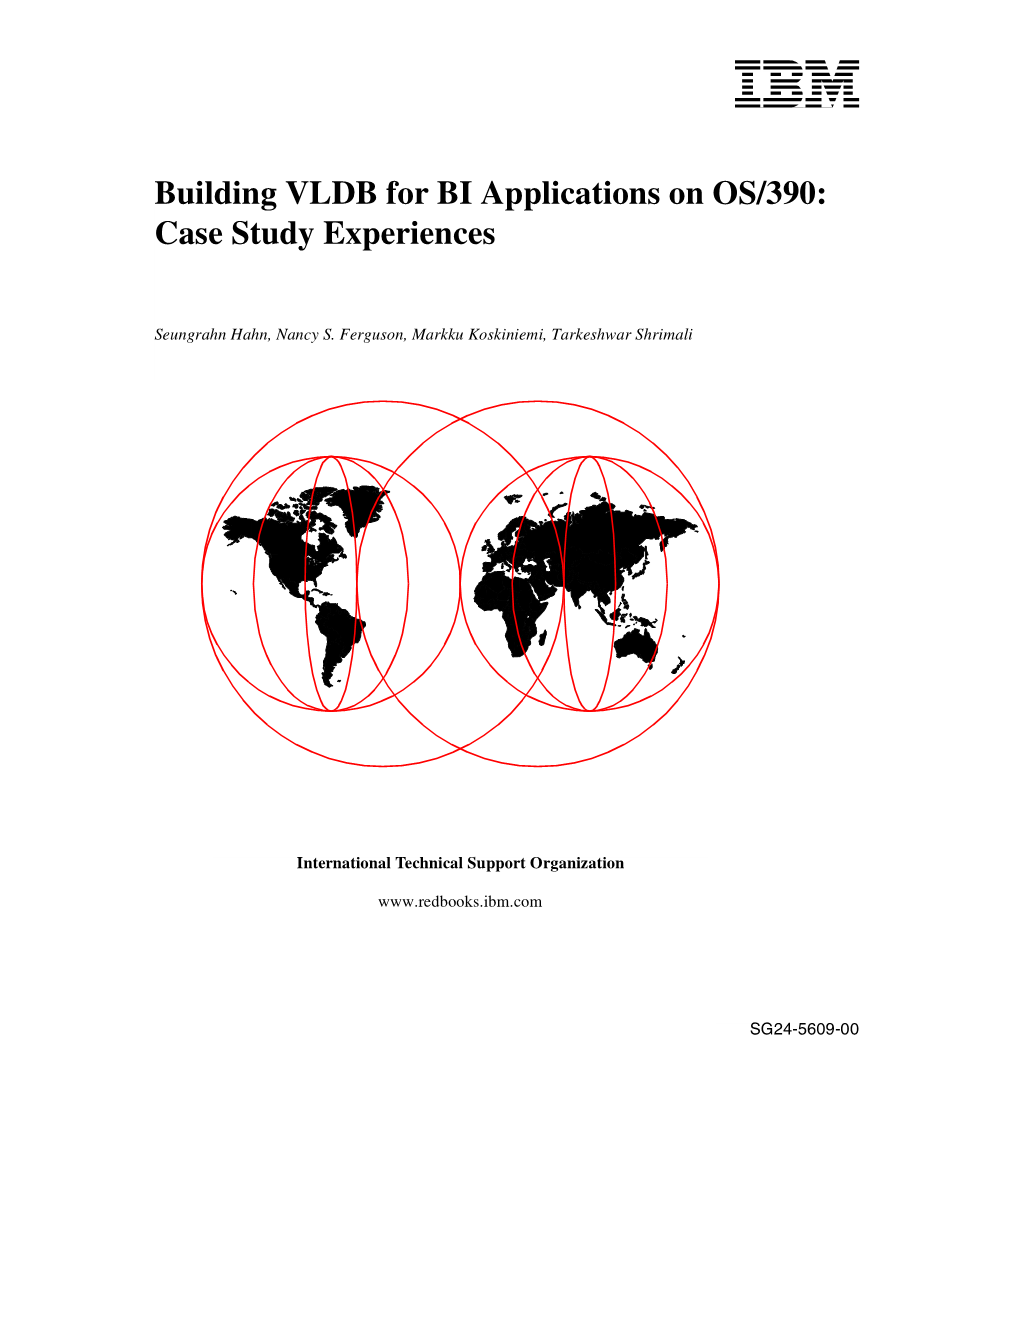 Building VLDB for BI Applications on OS/390: Case Study Experiences